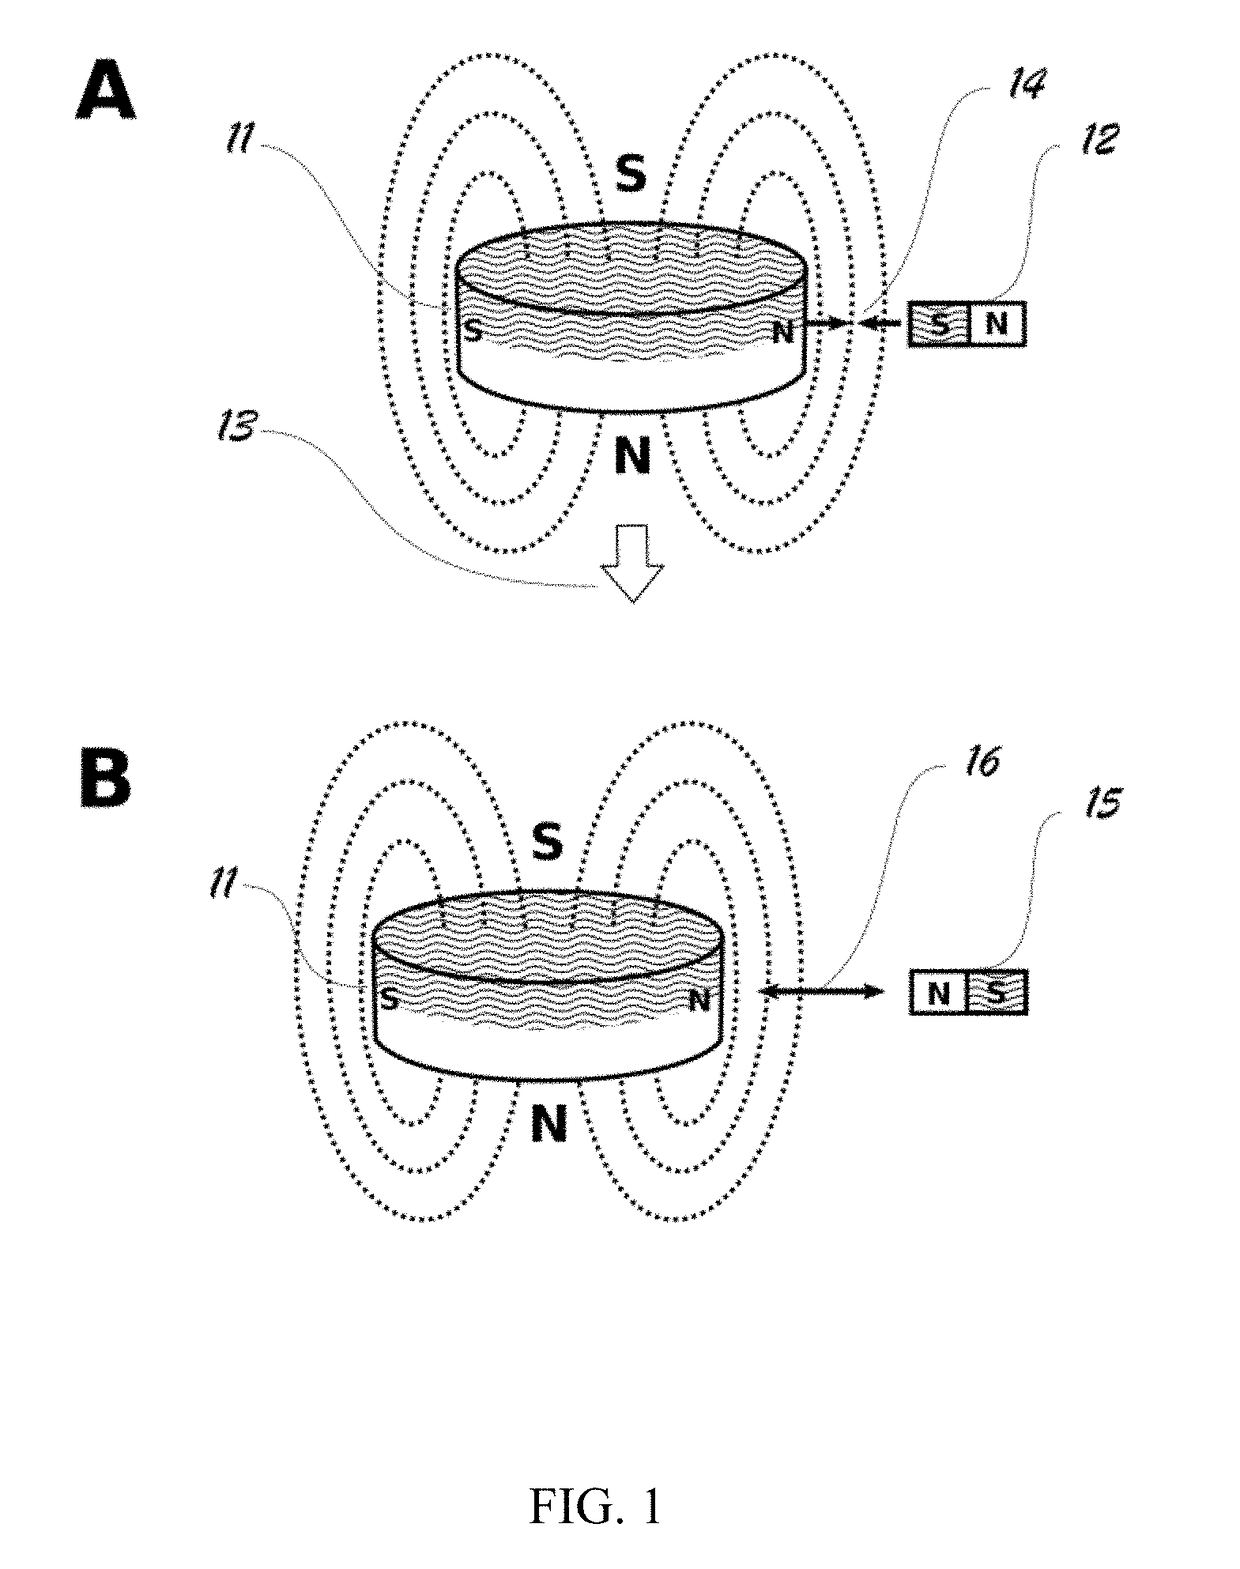 Time-Varying Magnetic Field Therapy Using Multistable Latching Mechanisms